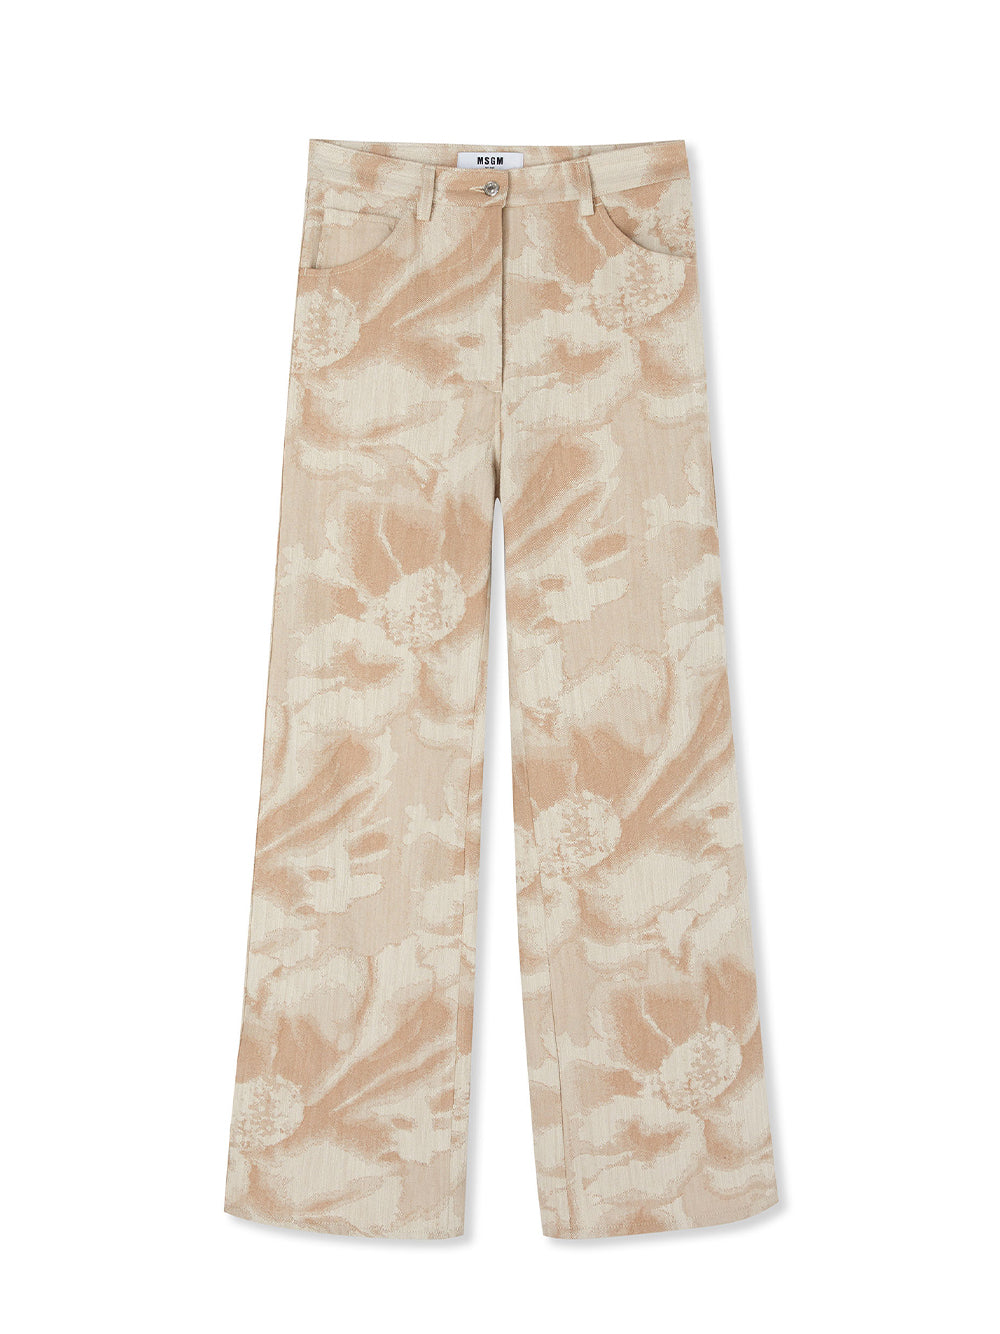 Jacquard Fabric Pants with 5 Pockets and Large Daisy Design (Sand)